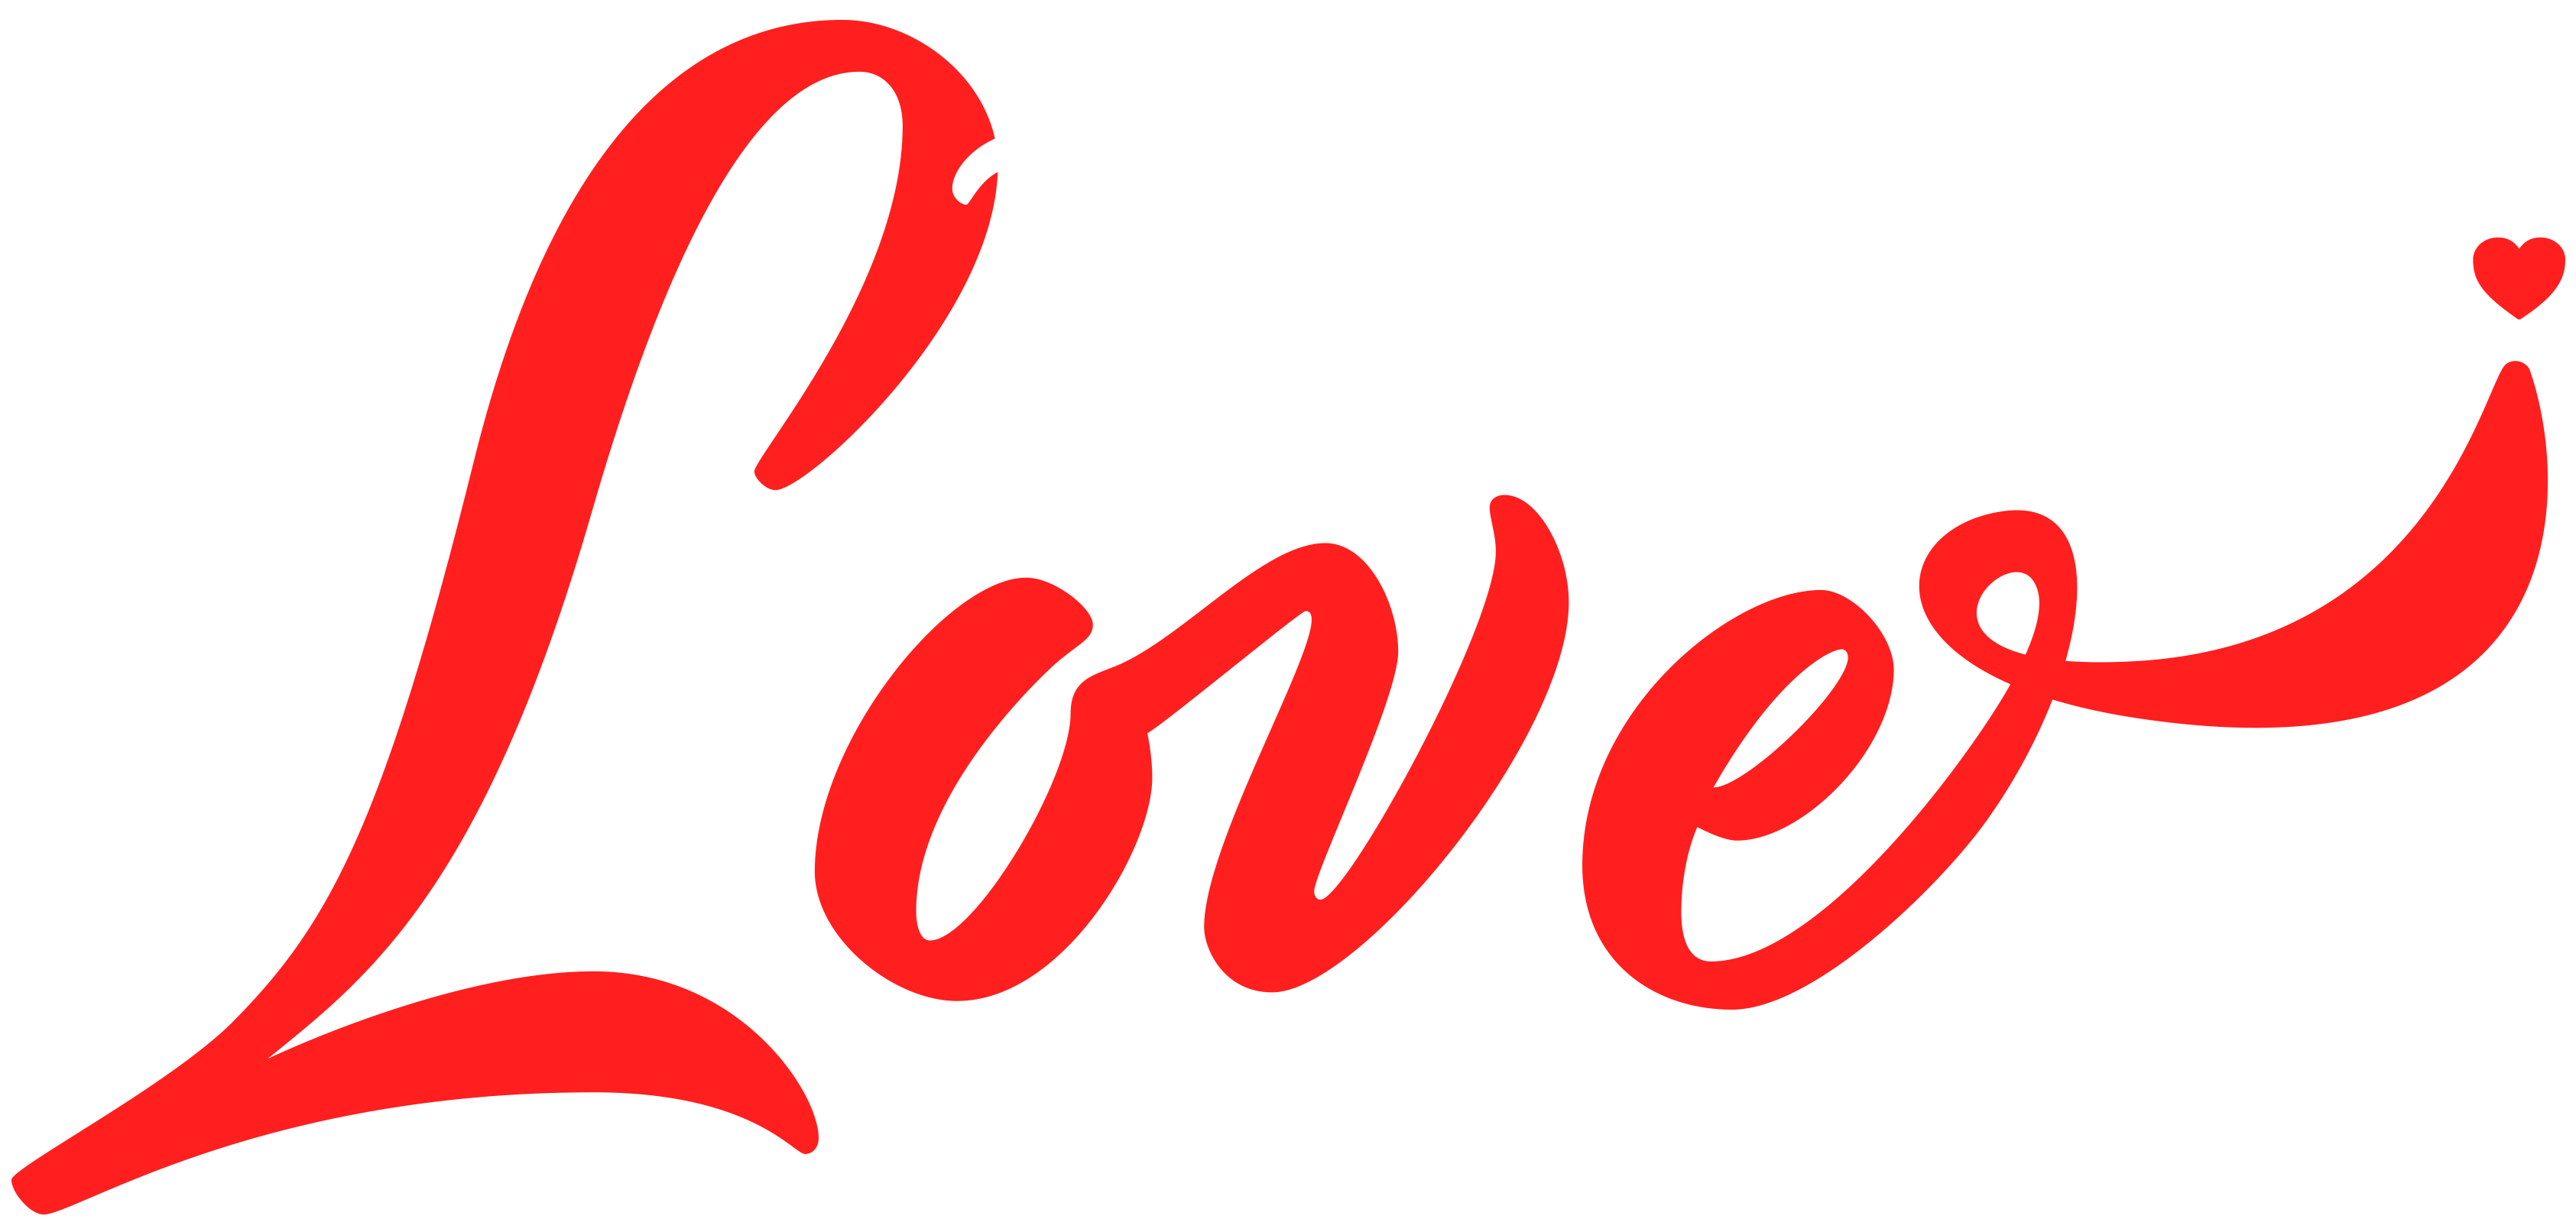 7 Days of Love logo - Awards & Events